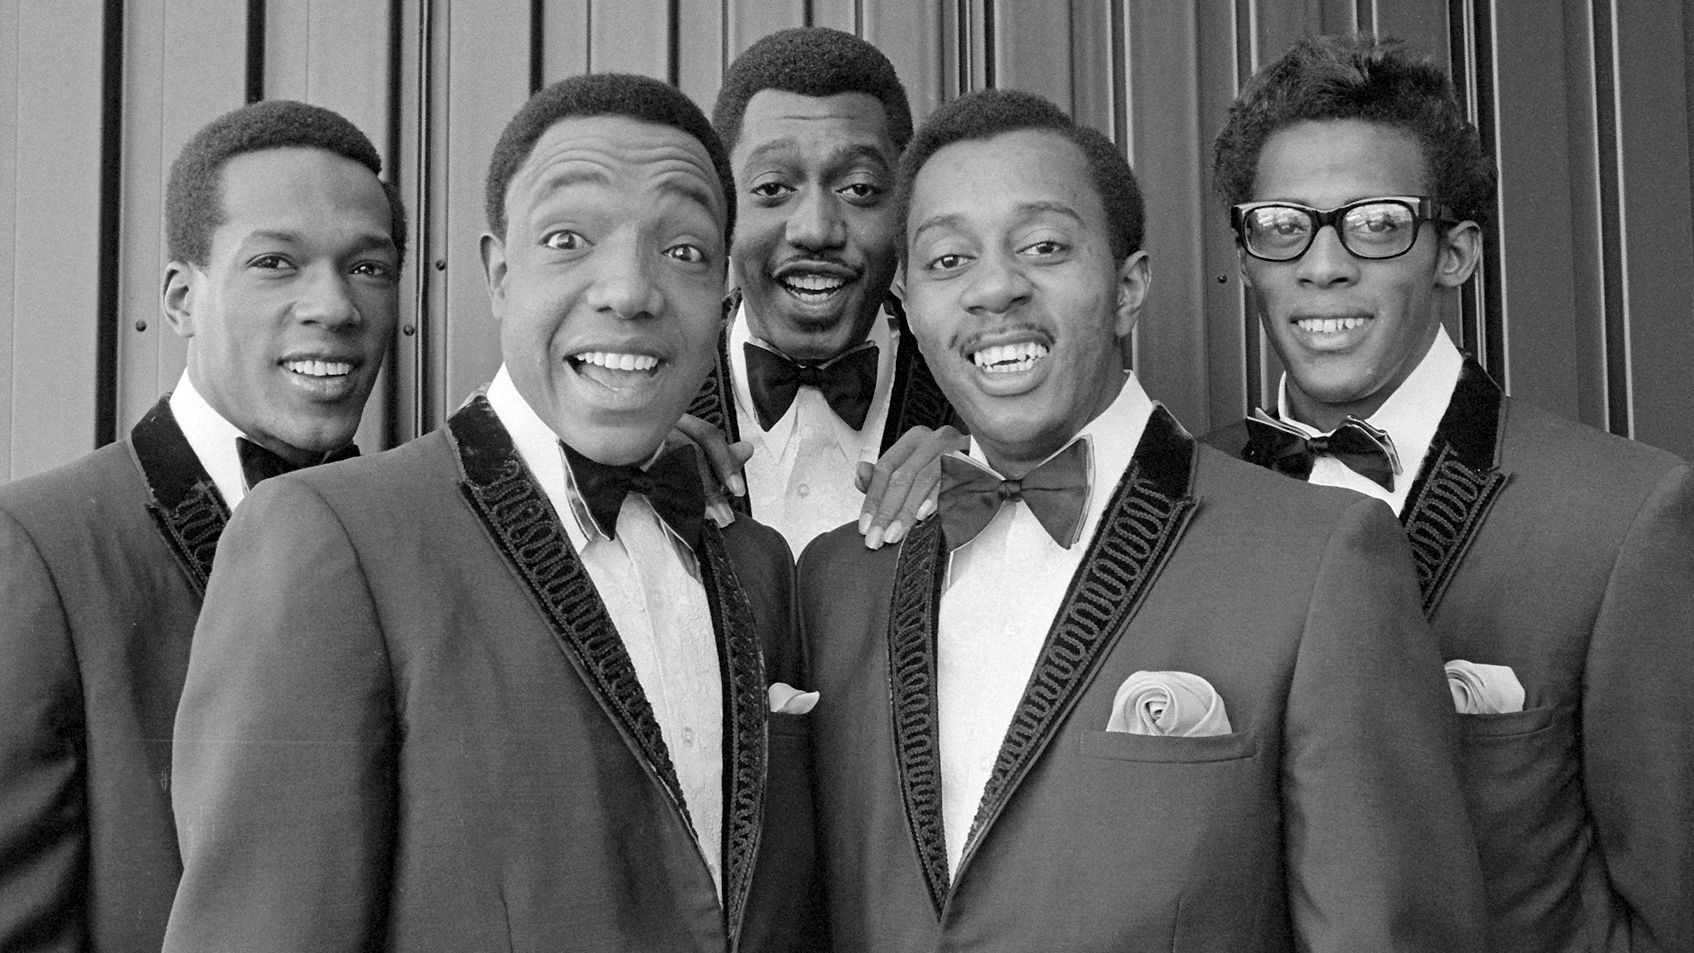 102313-national-the-temptations-band-group